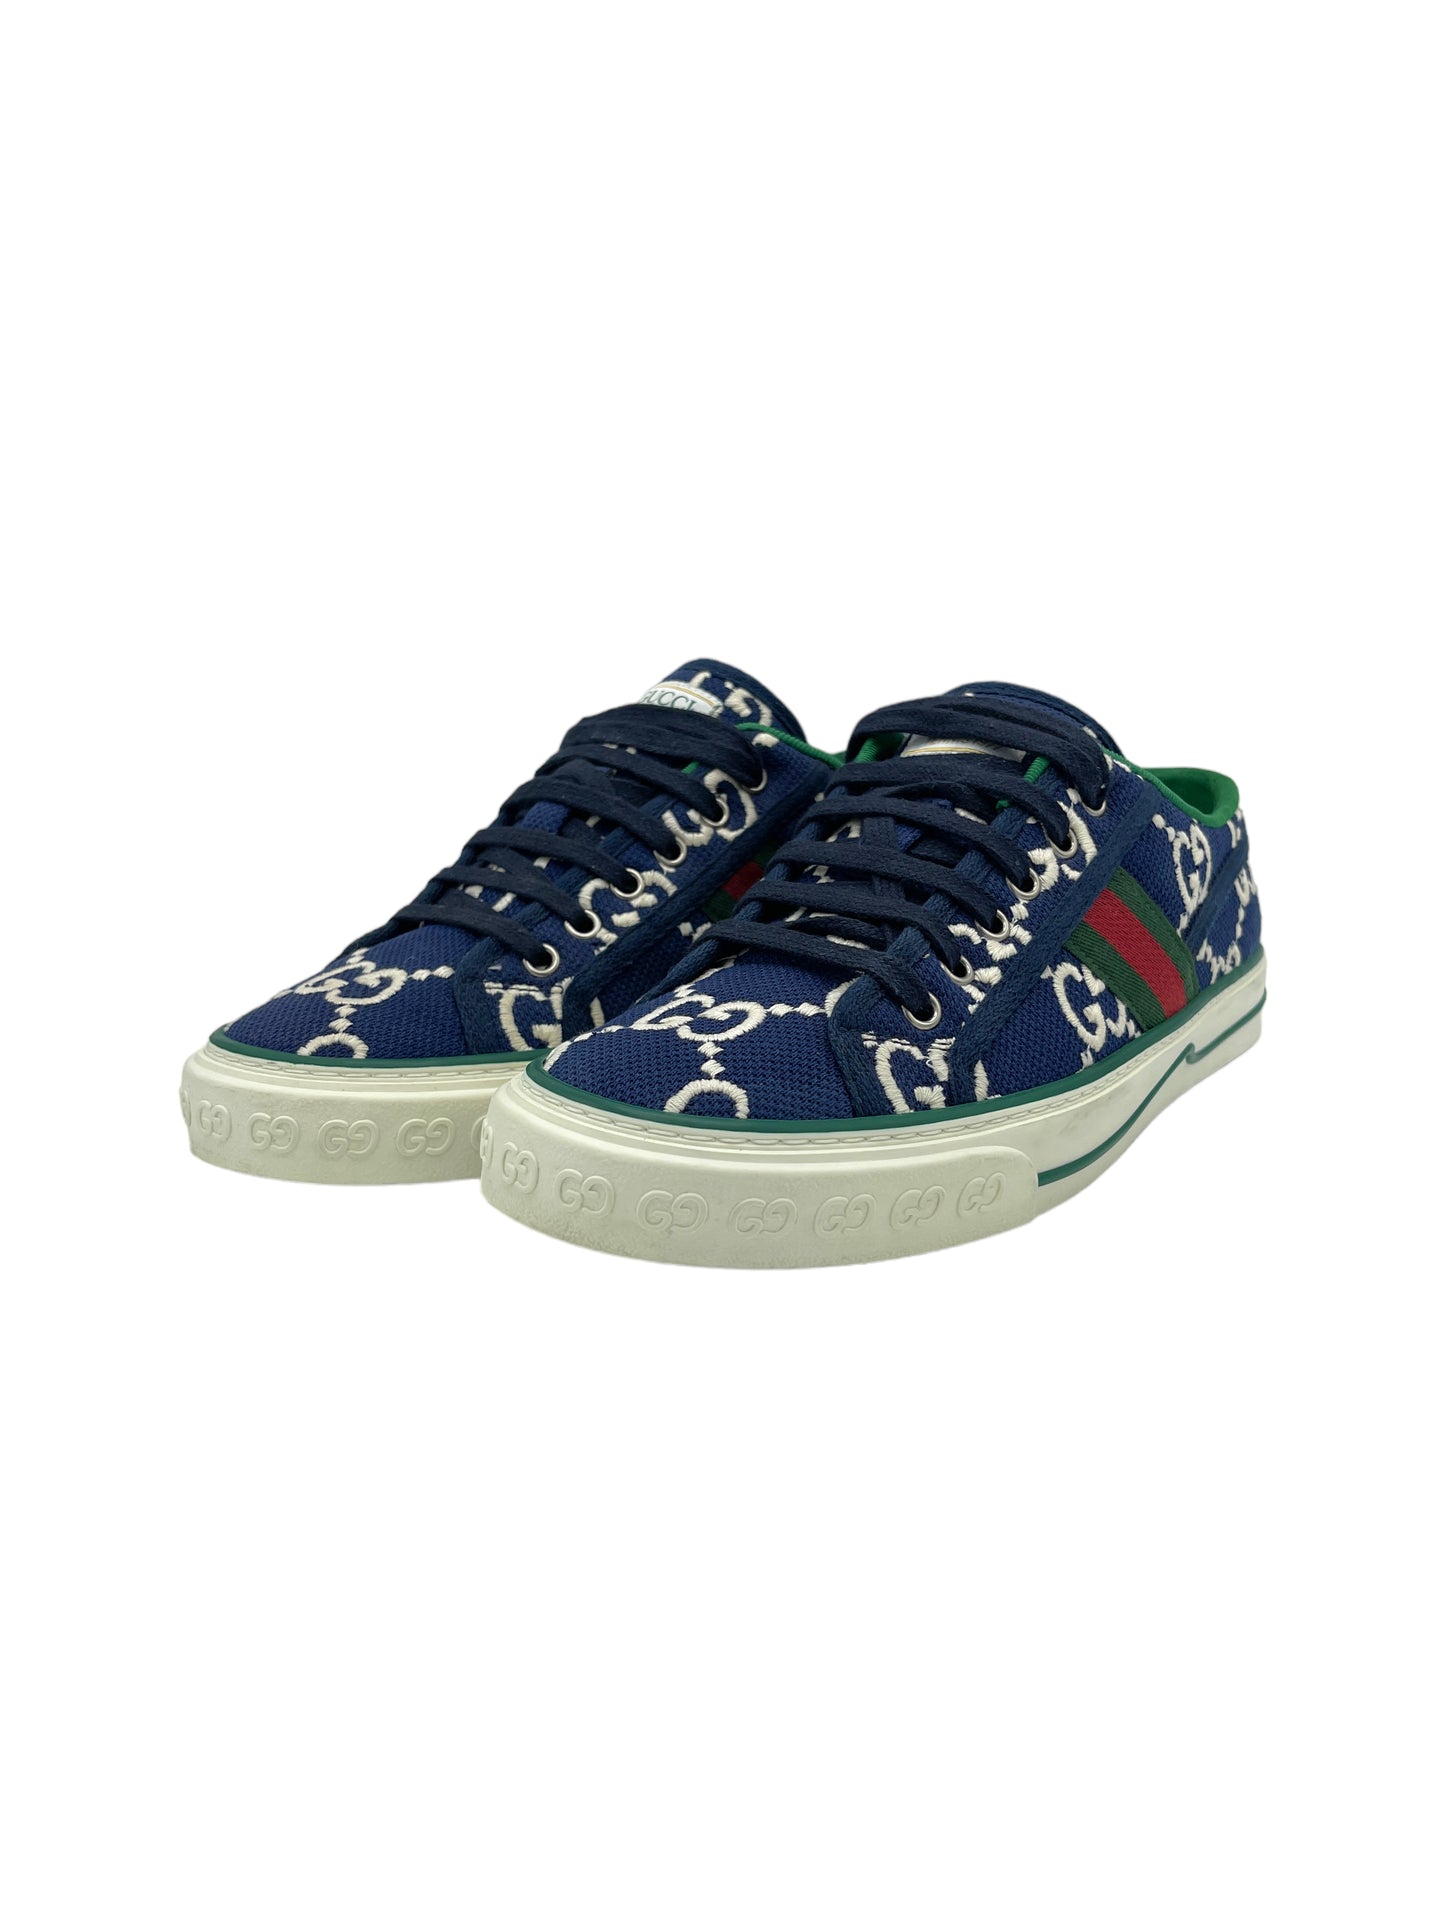 Gucci Navy Blue GG ‘Gucci Tennis 1977’ Sneakers - Genuine Design Luxury Consignment for Men. New & Pre-Owned Clothing, Shoes, & Accessories. Calgary, Canada